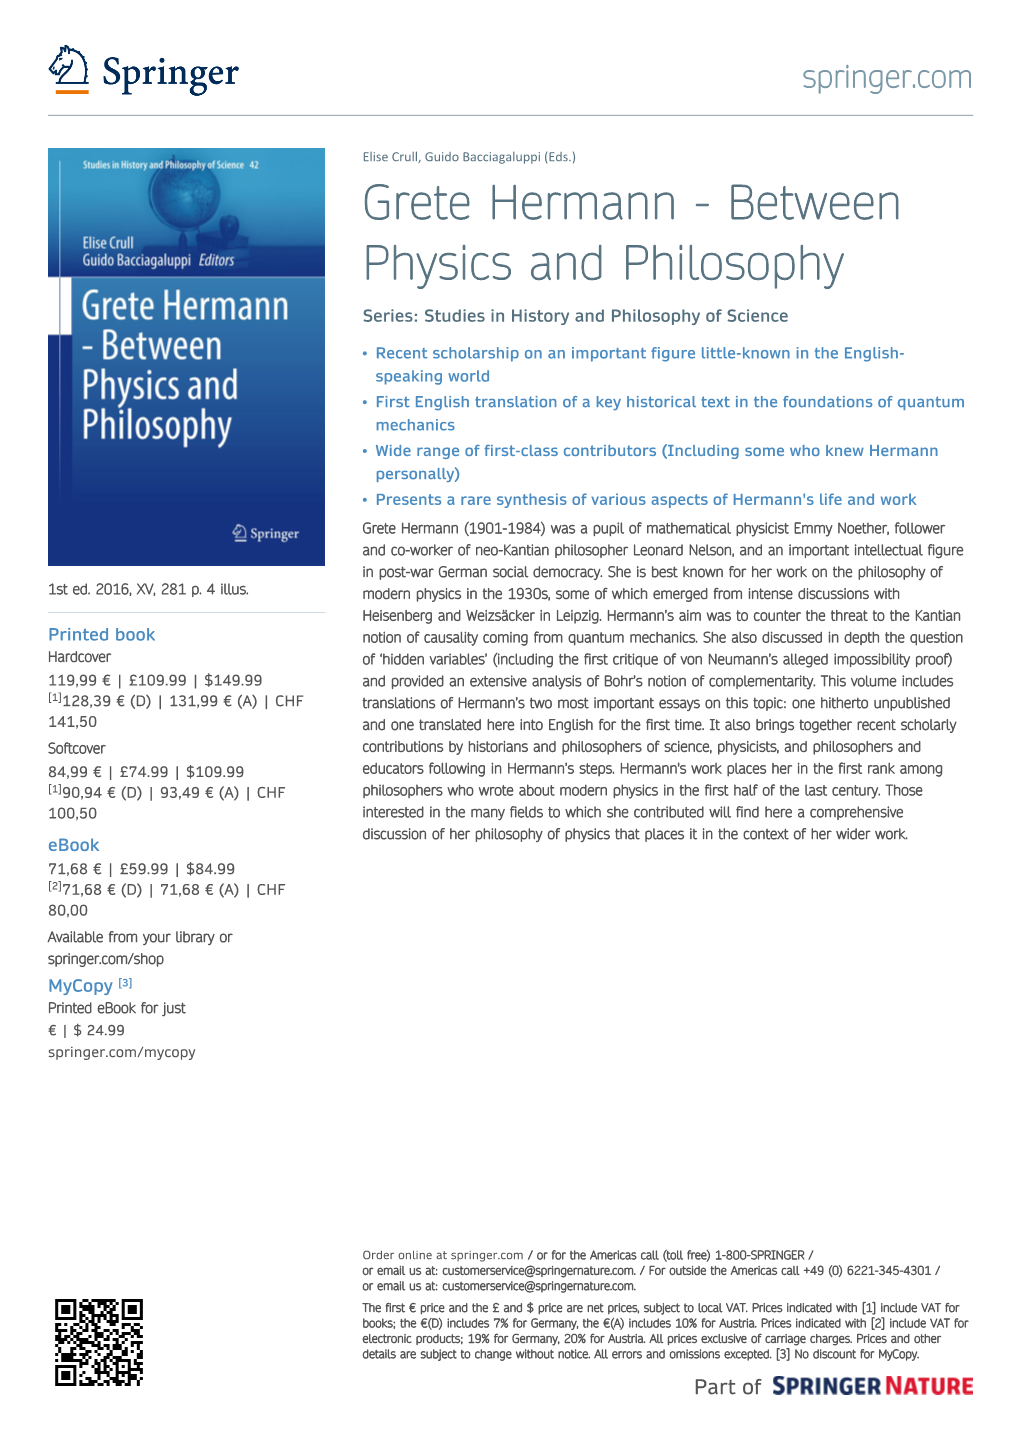 Grete Hermann - Between Physics and Philosophy Series: Studies in History and Philosophy of Science